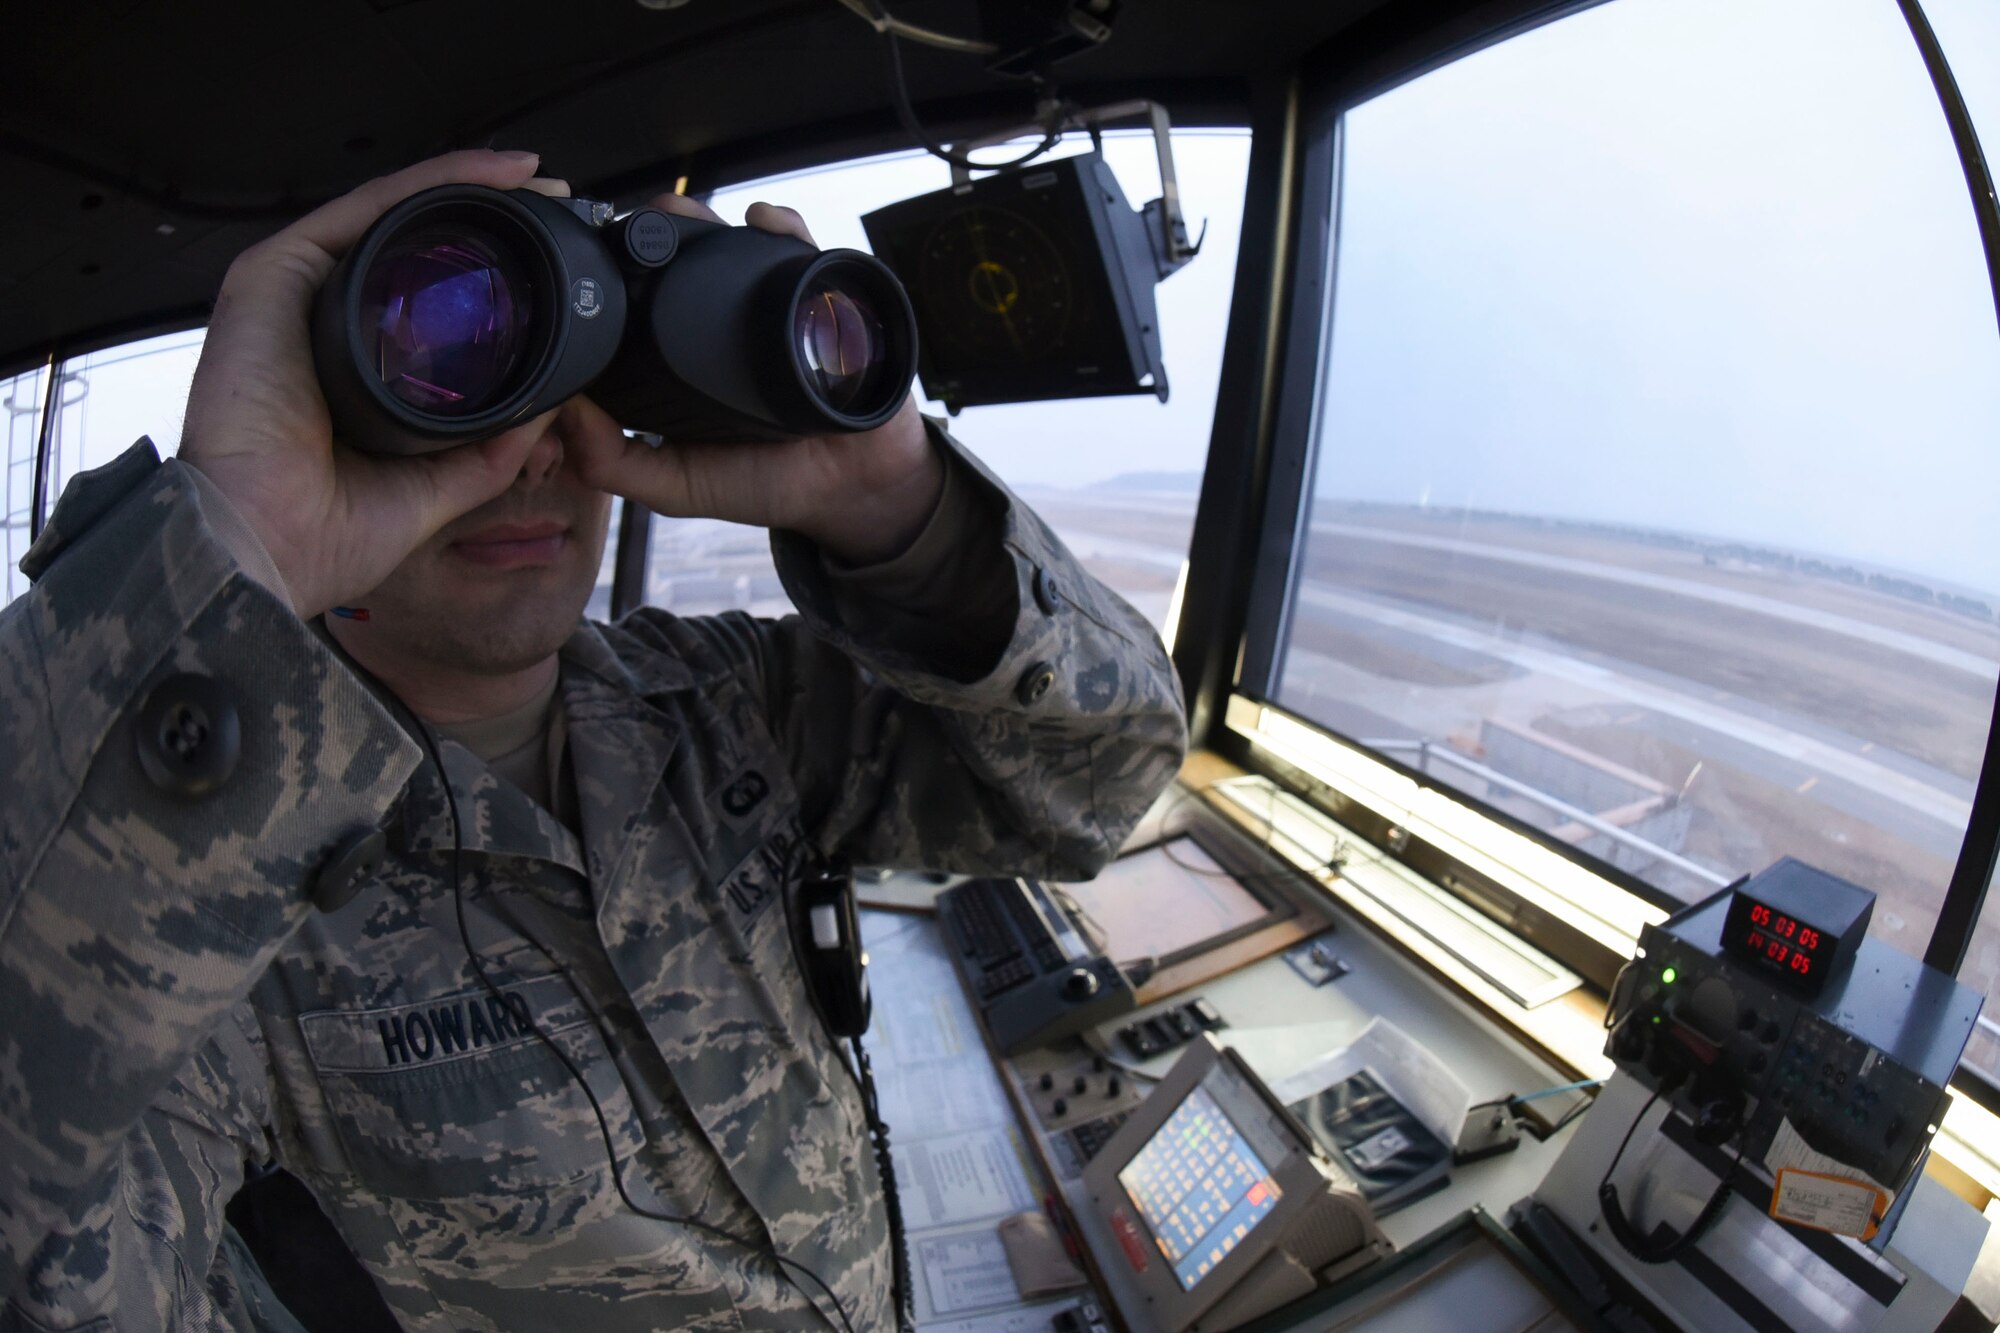 Staff Sgt. Jeffery Howard, 8th Operations Support Squadron air traffic controller, looks at the runway through his binoculars at Kunsan Air Base, Republic of Korea, Jan. 5, 2017. Howard ensures the runway is clear from any hazards to aircraft. (U.S. Air Force photo by Senior Airman Michael Hunsaker/Released)